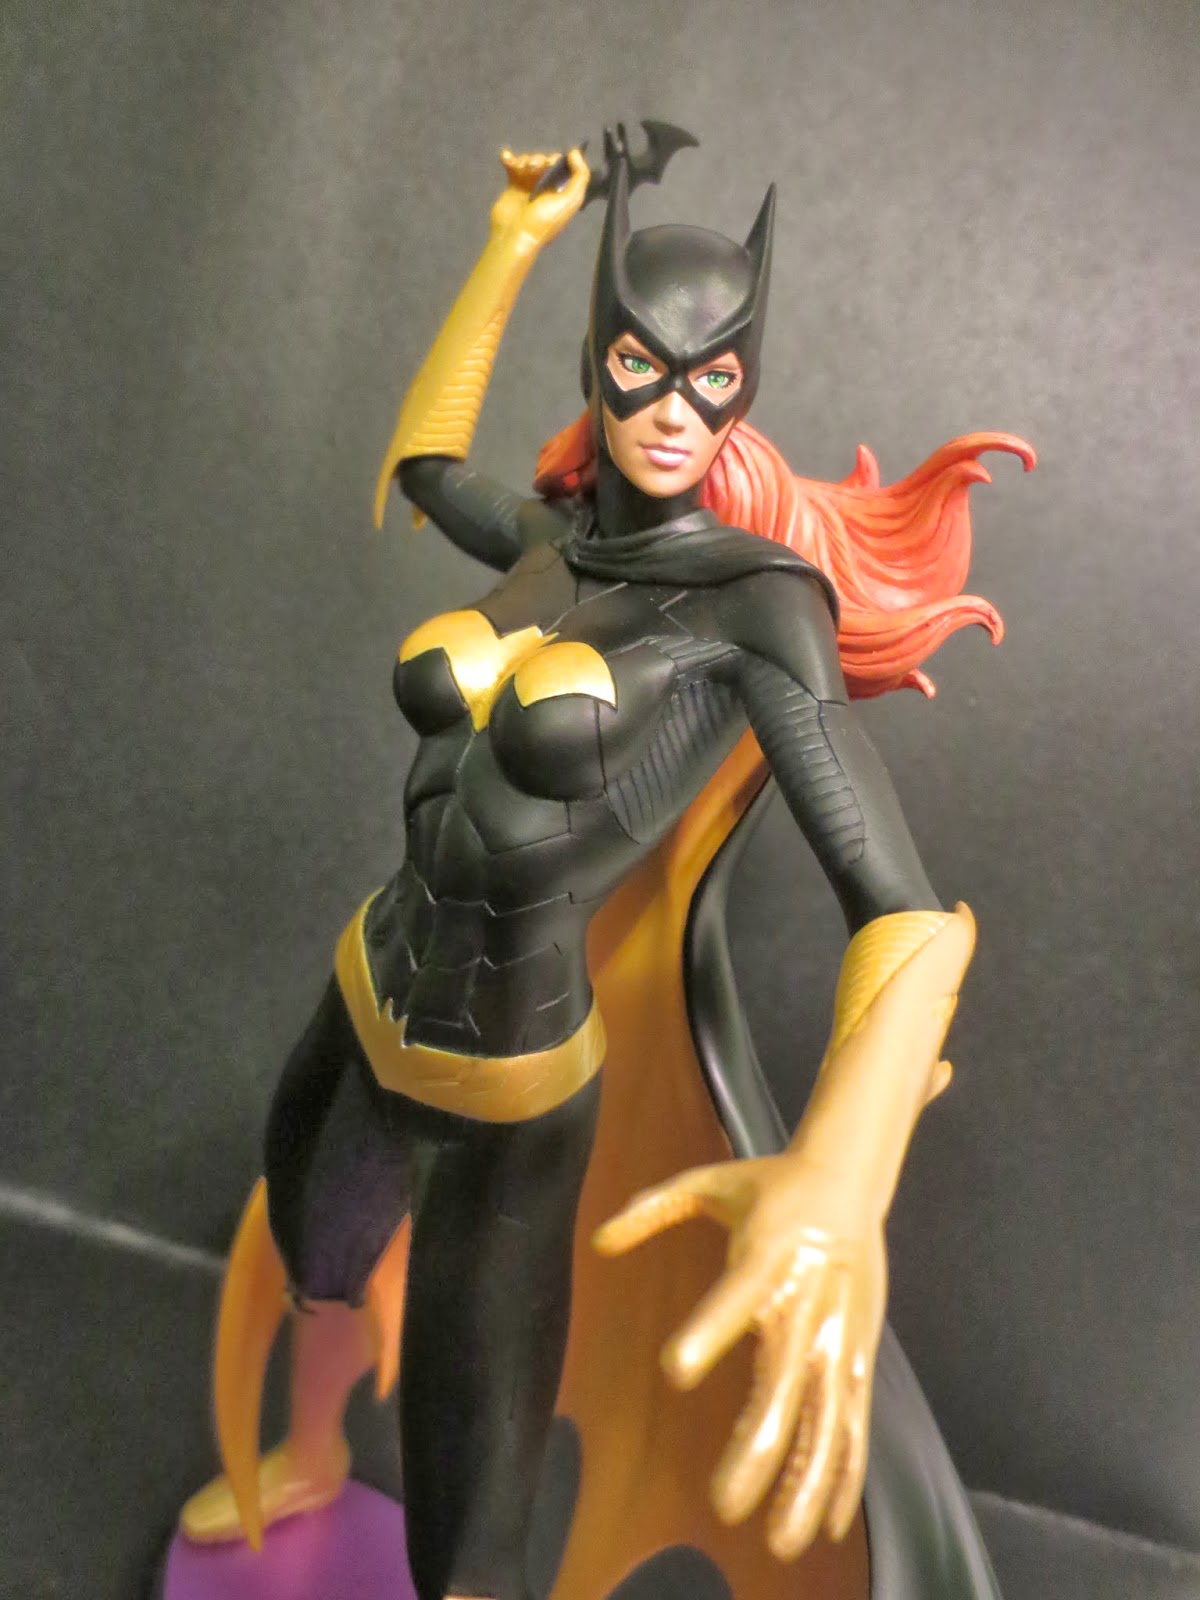 A New Batgirl Review: Batgirl from DC Comics Cover Girls from DC Collectibl...